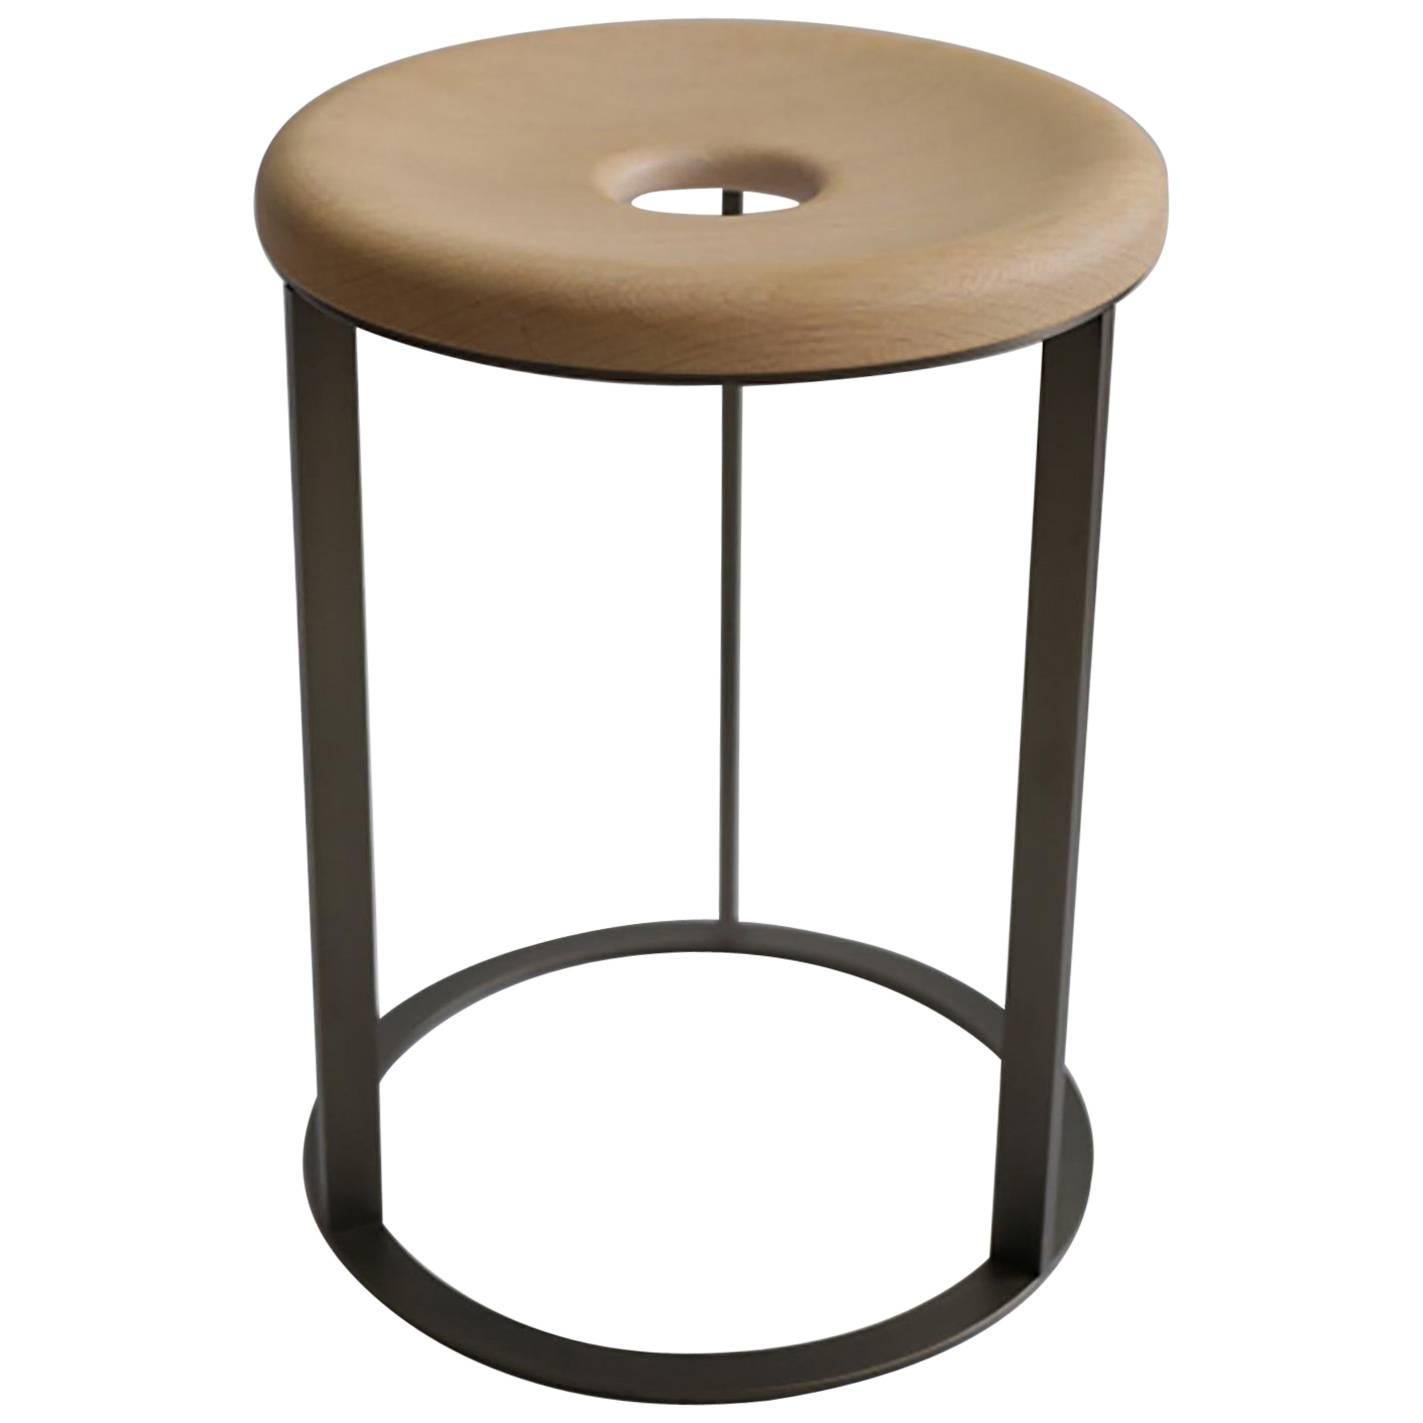 Round Wood and Metal Side Table or Stool Made in Italy